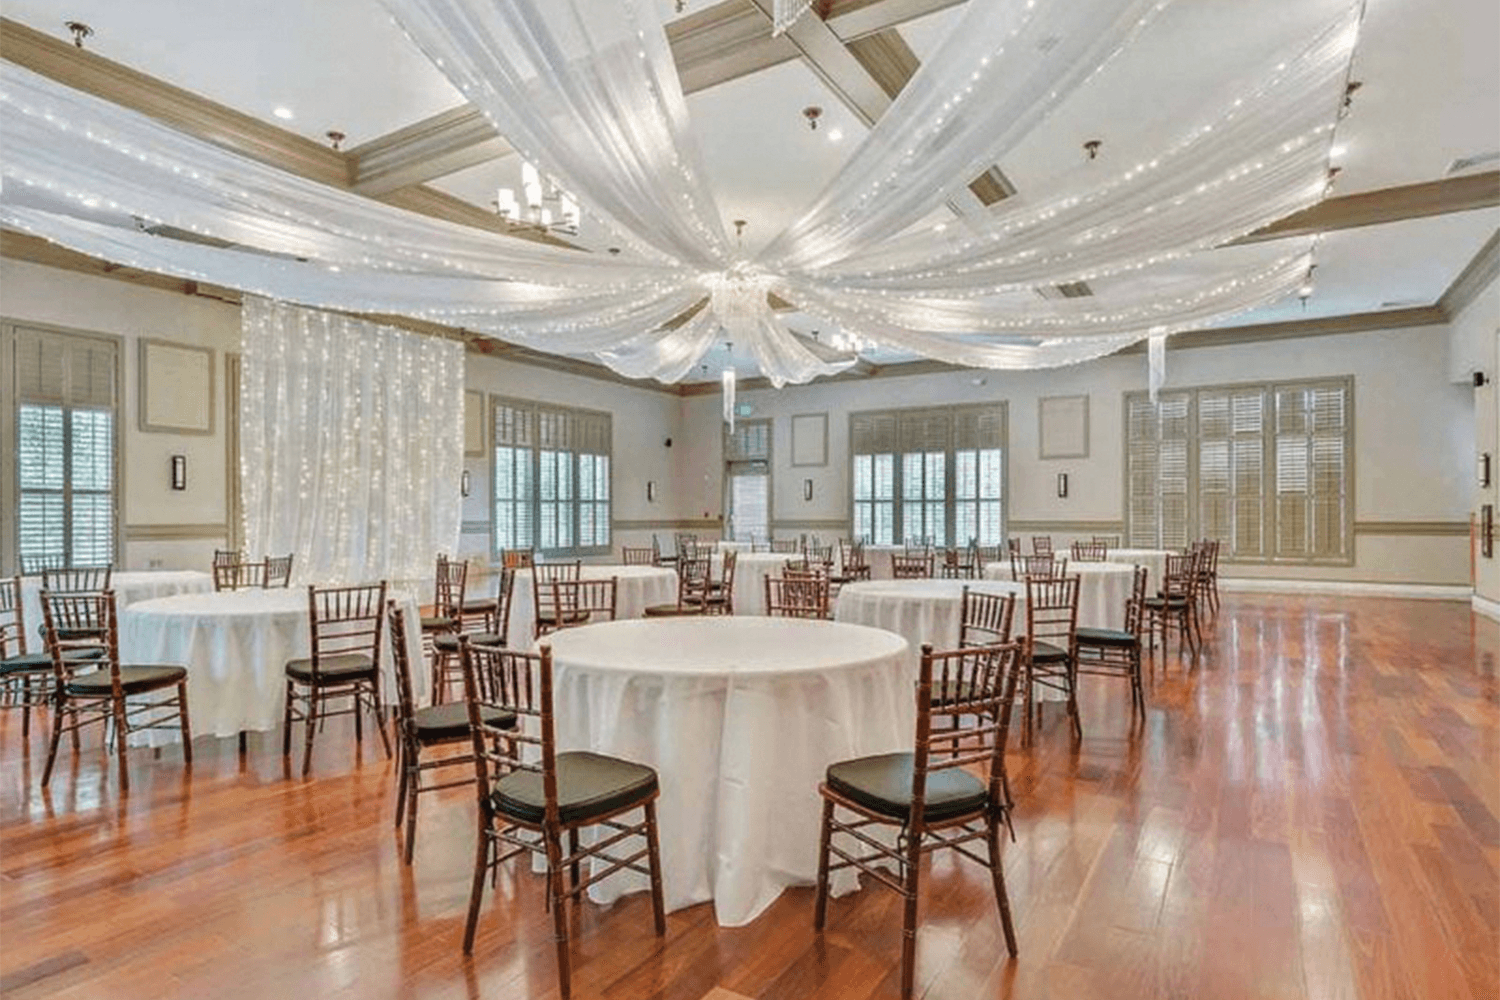 Event room with shiny wood floors, white drapery with string-lights, and tables with white table cloths